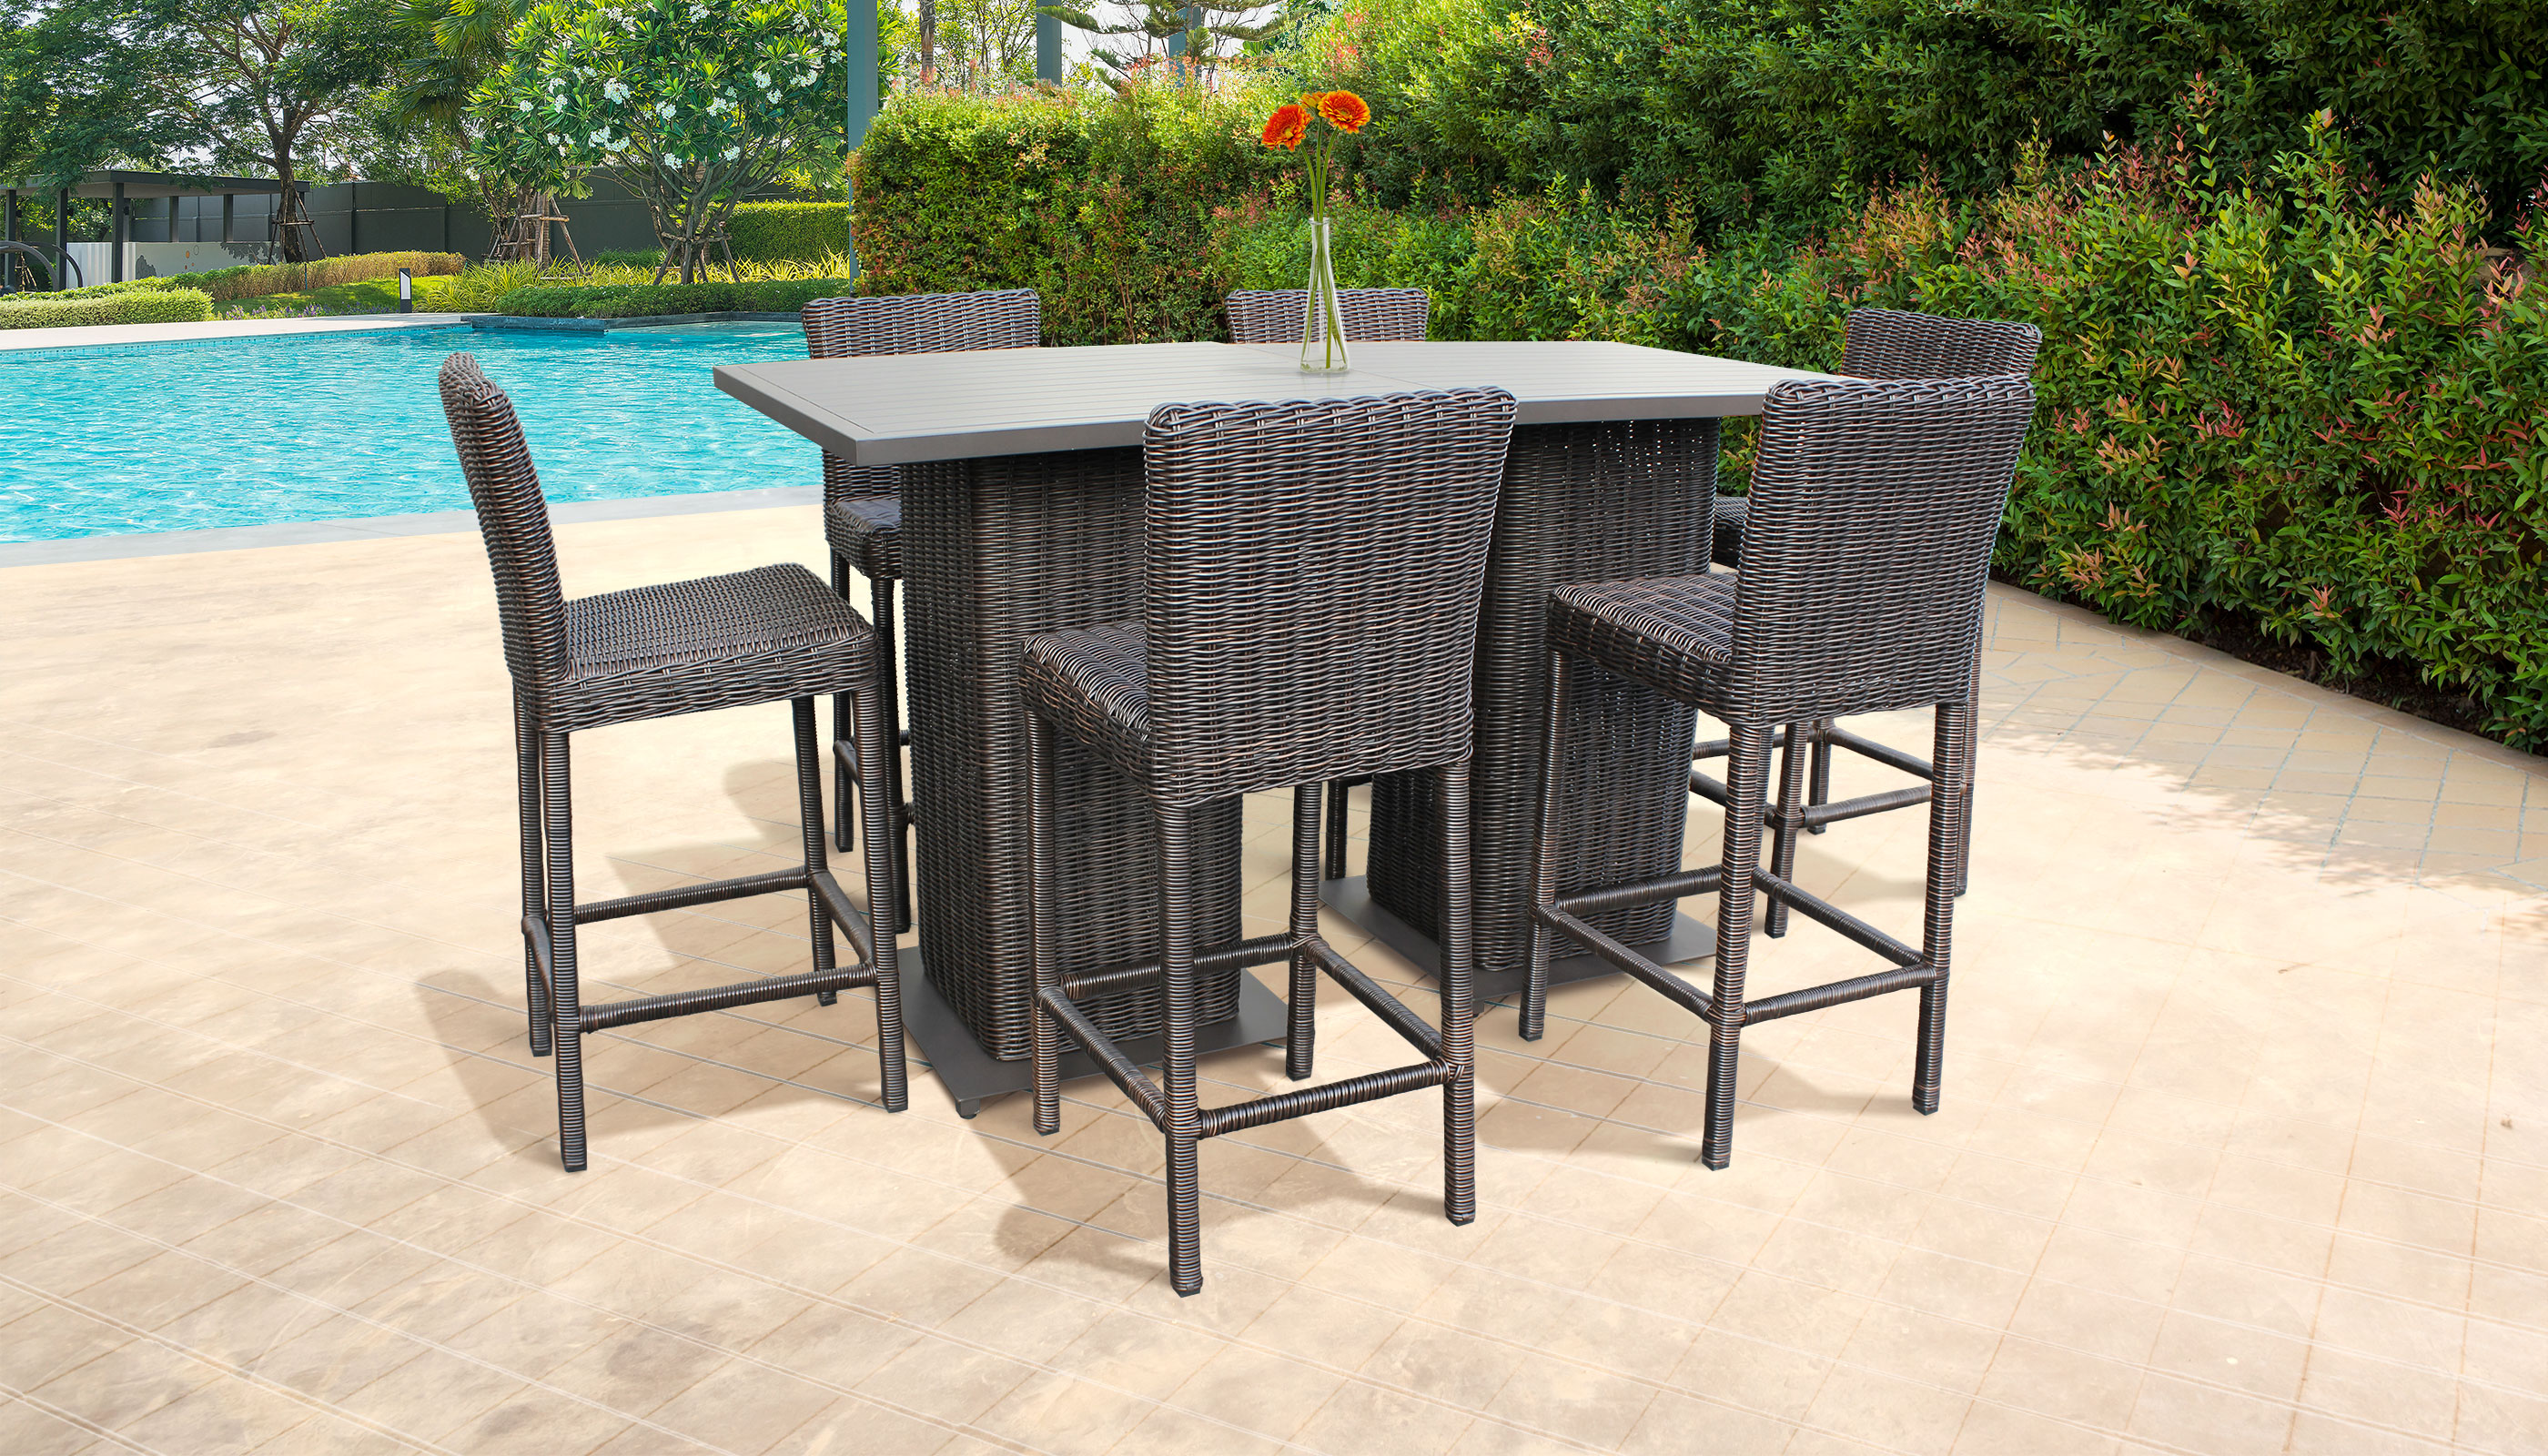 venice pub table set with barstools 8 piece outdoor wicker patio furniture